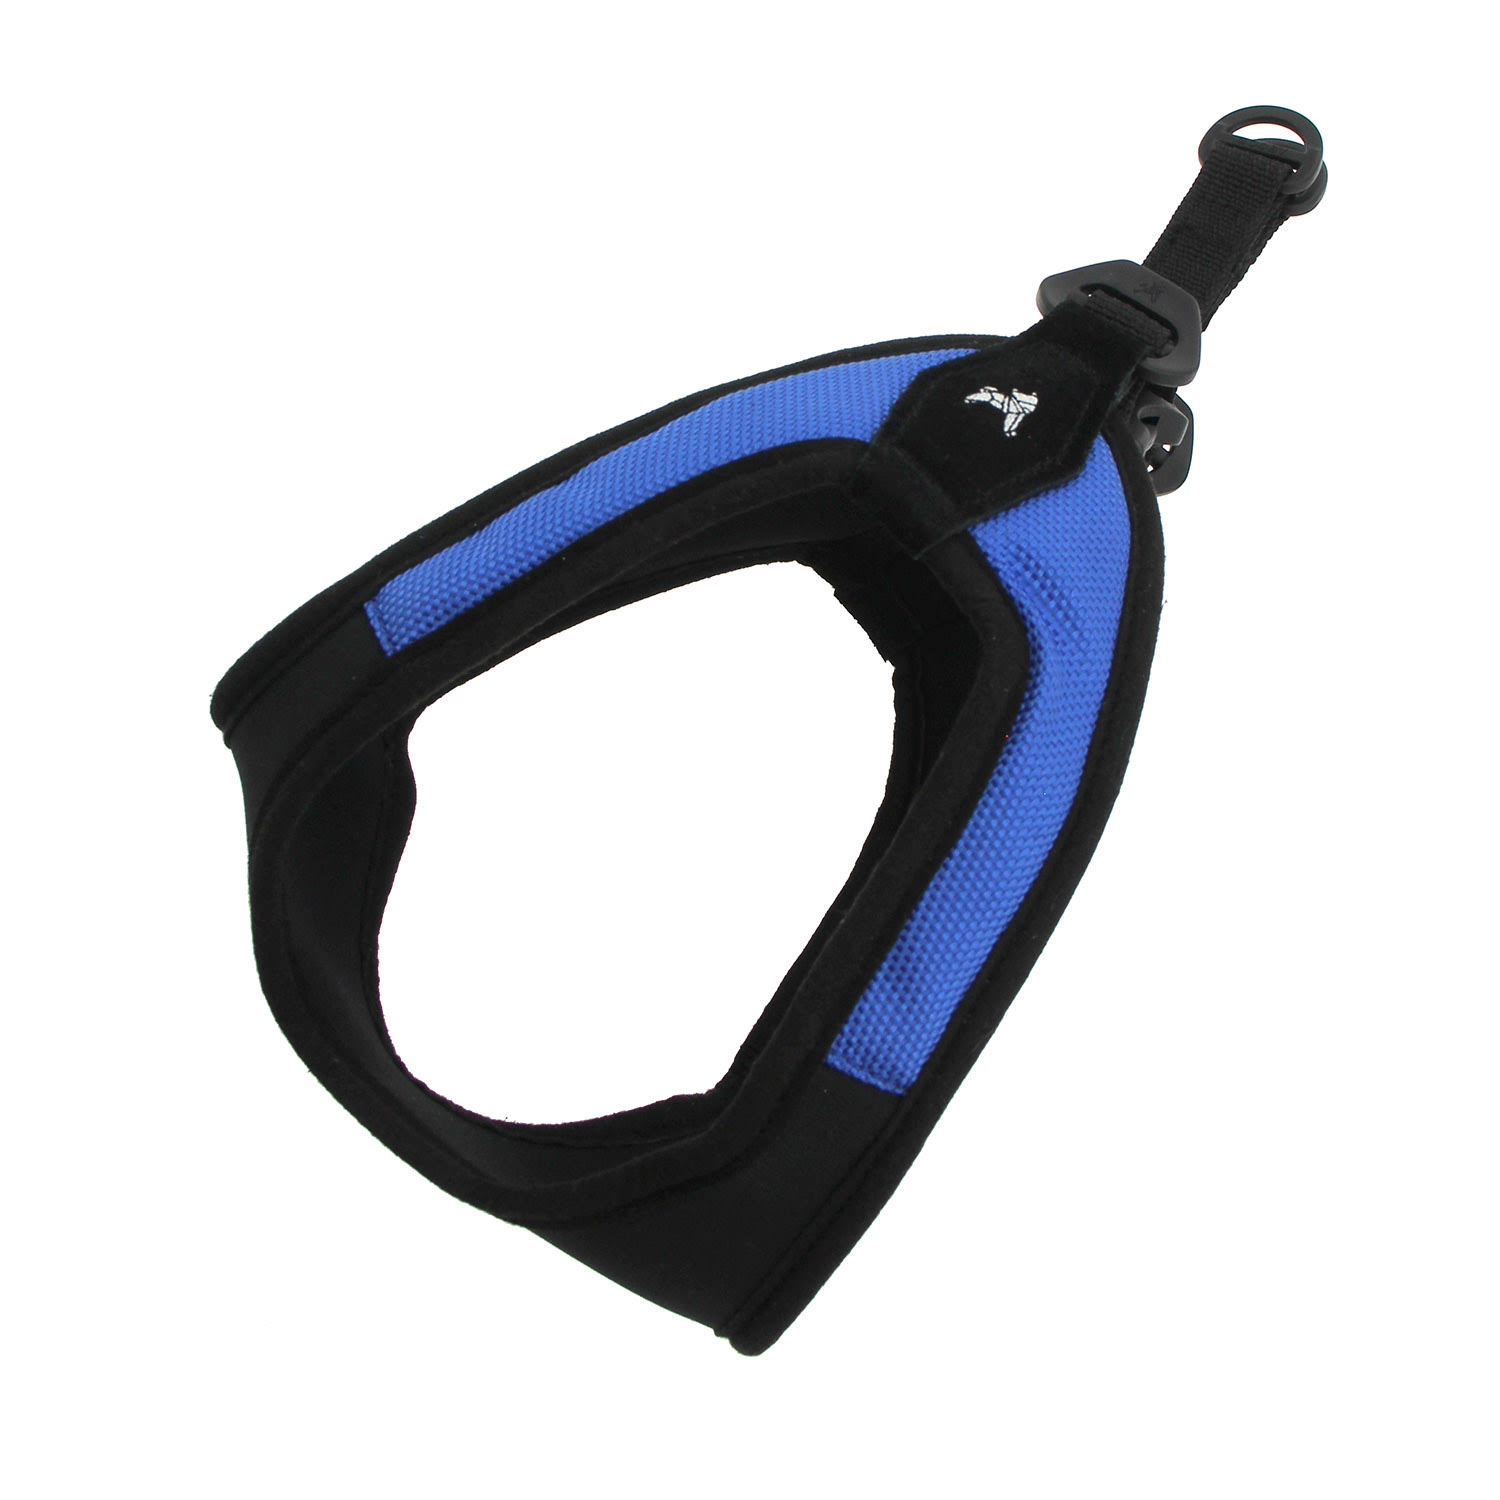 Gooby Escape Proof Easy Fit Dog Harness - Blue - Medium